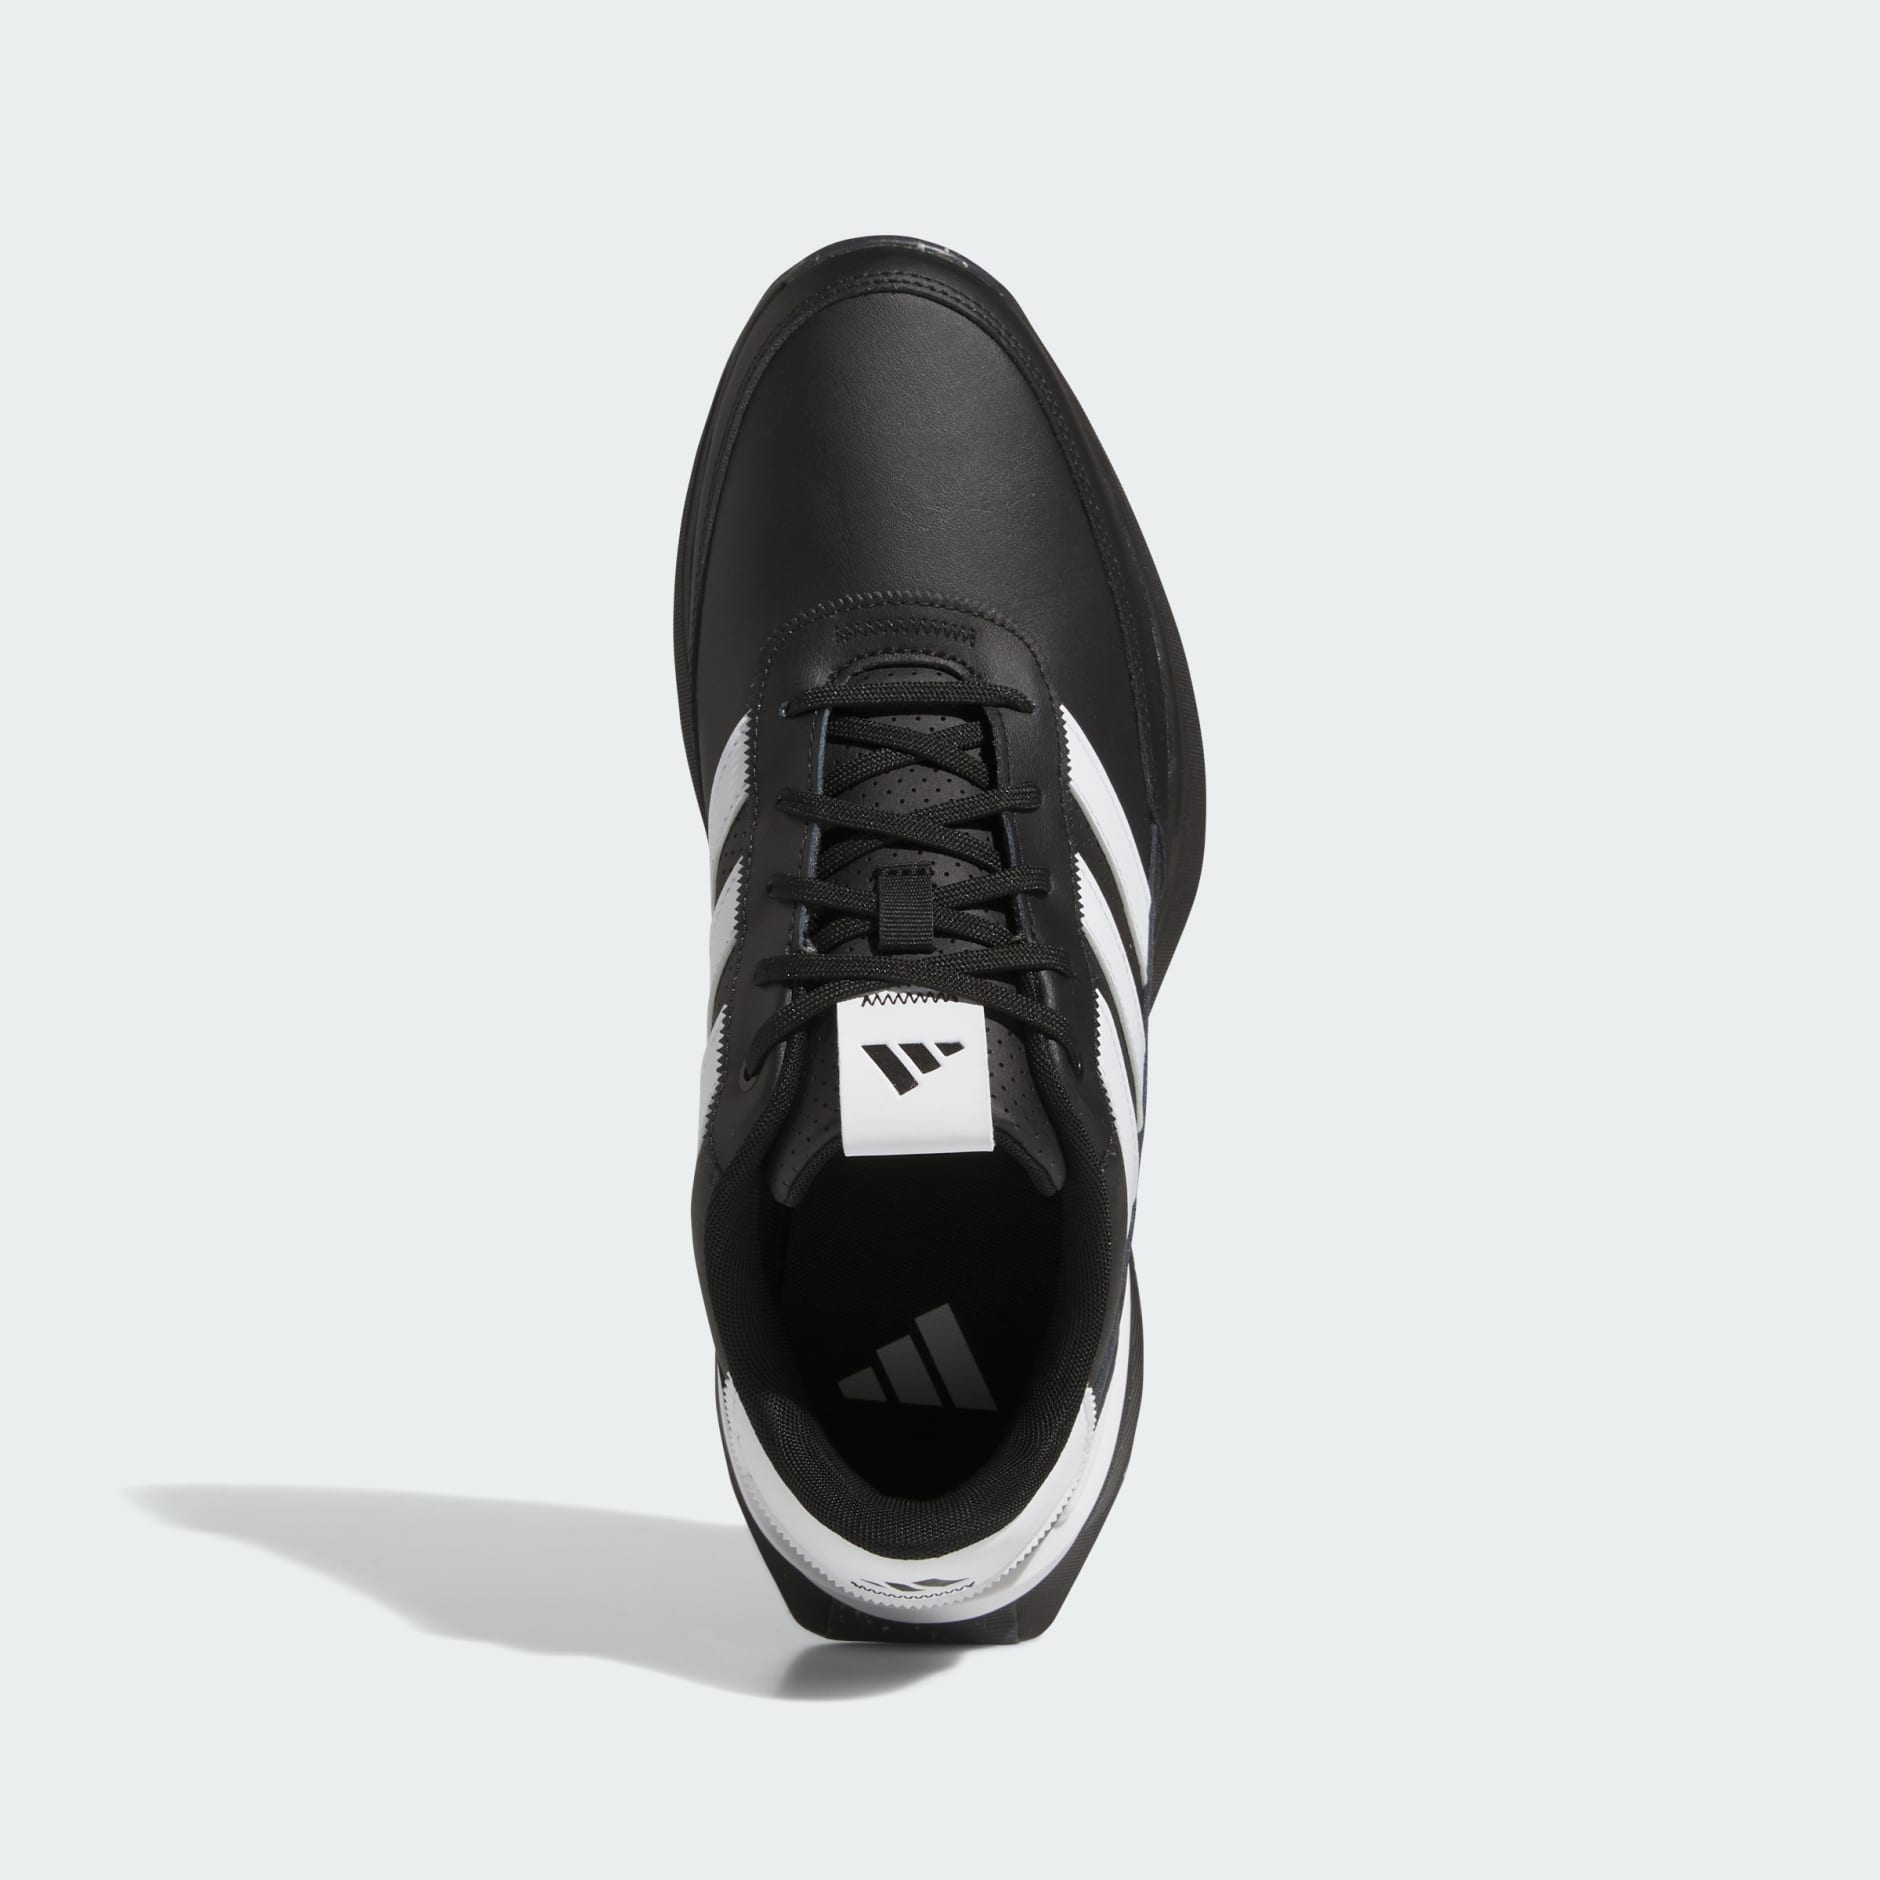 Shoes - S2G Spikeless Leather 24 Golf Shoes - Black | adidas South Africa